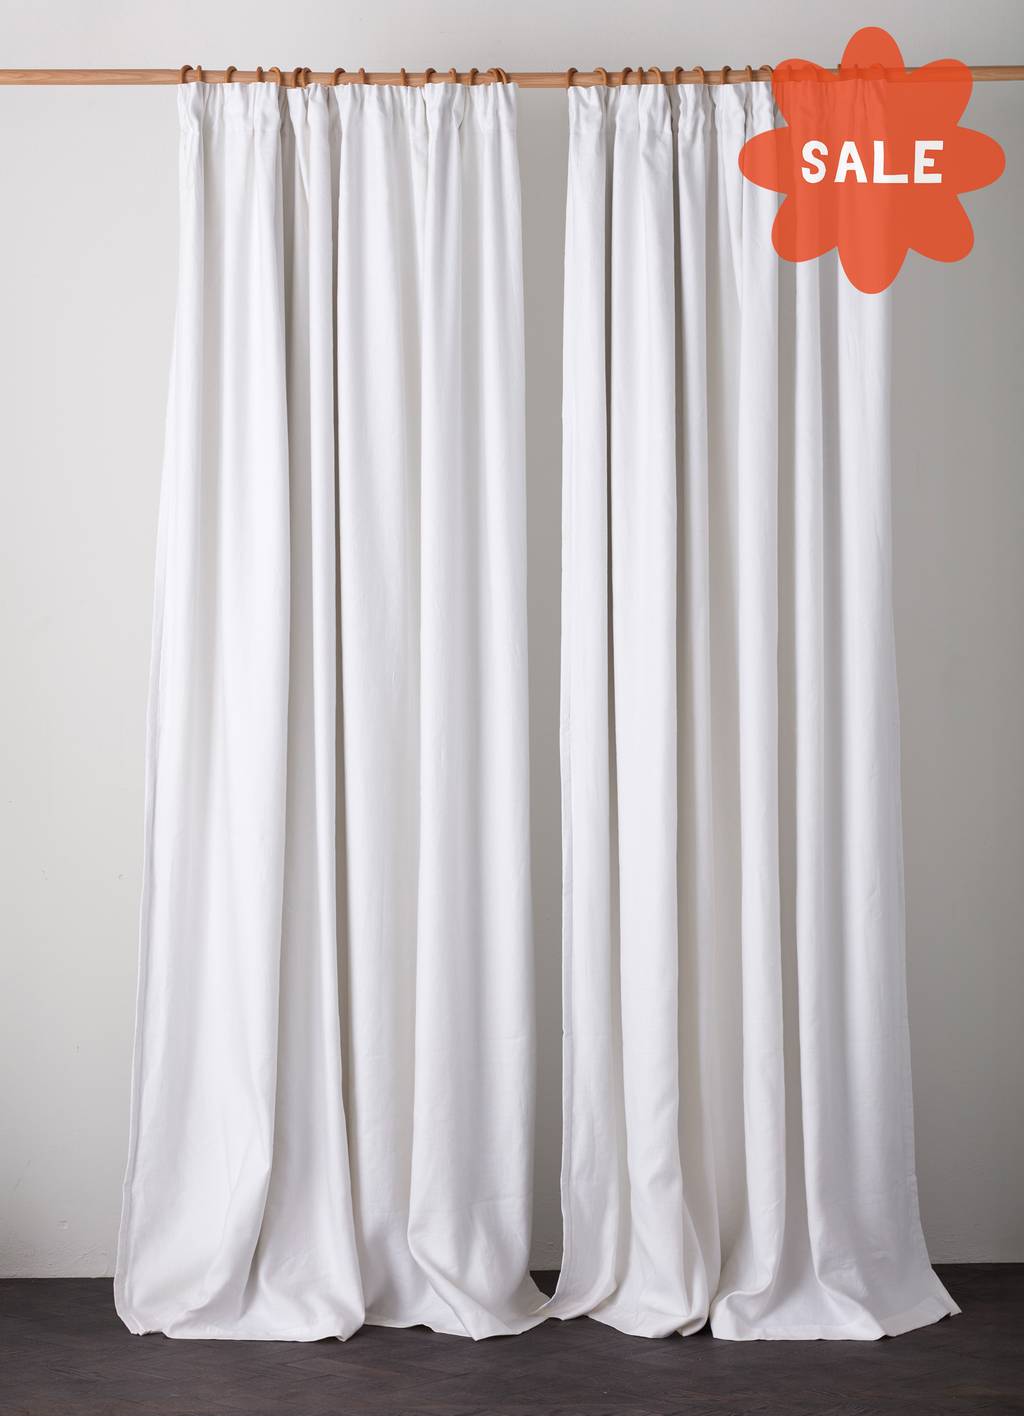 Curtains collection image